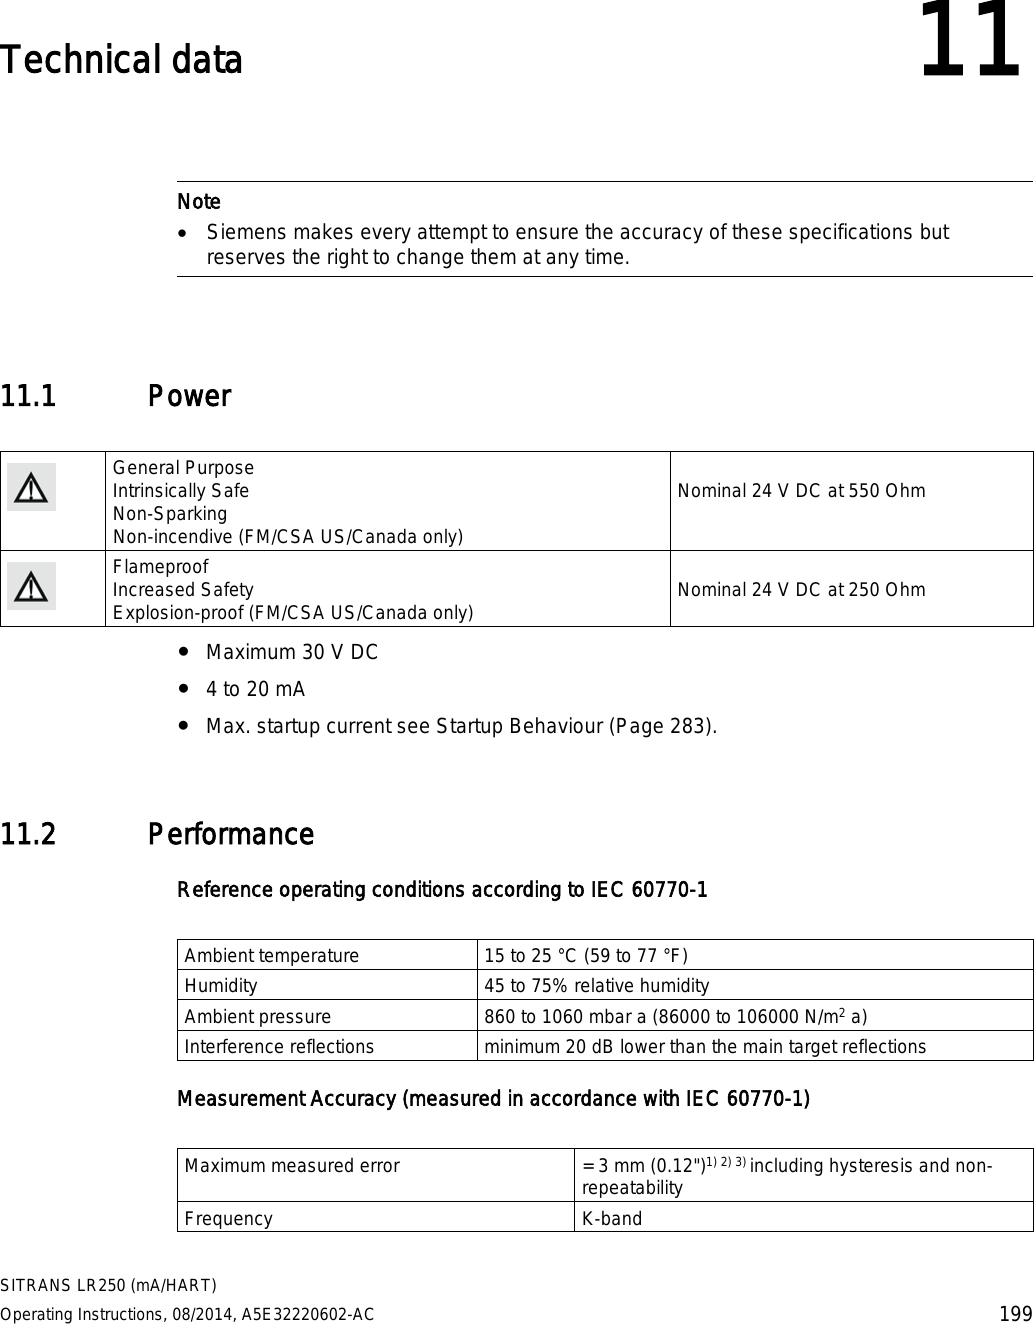  SITRANS LR250 (mA/HART) Operating Instructions, 08/2014, A5E32220602-AC 199  Technical data 11    Note • Siemens makes every attempt to ensure the accuracy of these specifications but reserves the right to change them at any time.  11.1 Power   General Purpose Intrinsically Safe Non-Sparking Non-incendive (FM/CSA US/Canada only)  Nominal 24 V DC at 550 Ohm  Flameproof Increased Safety Explosion-proof (FM/CSA US/Canada only)  Nominal 24 V DC at 250 Ohm ● Maximum 30 V DC ● 4 to 20 mA ● Max. startup current see Startup Behaviour (Page 283). 11.2 Performance Reference operating conditions according to IEC 60770-1  Ambient temperature 15 to 25 °C (59 to 77 °F) Humidity 45 to 75% relative humidity Ambient pressure 860 to 1060 mbar a (86000 to 106000 N/m2 a) Interference reflections minimum 20 dB lower than the main target reflections Measurement Accuracy (measured in accordance with IEC 60770-1)  Maximum measured error = 3 mm (0.12&quot;)1) 2) 3) including hysteresis and non-repeatability Frequency K-band 